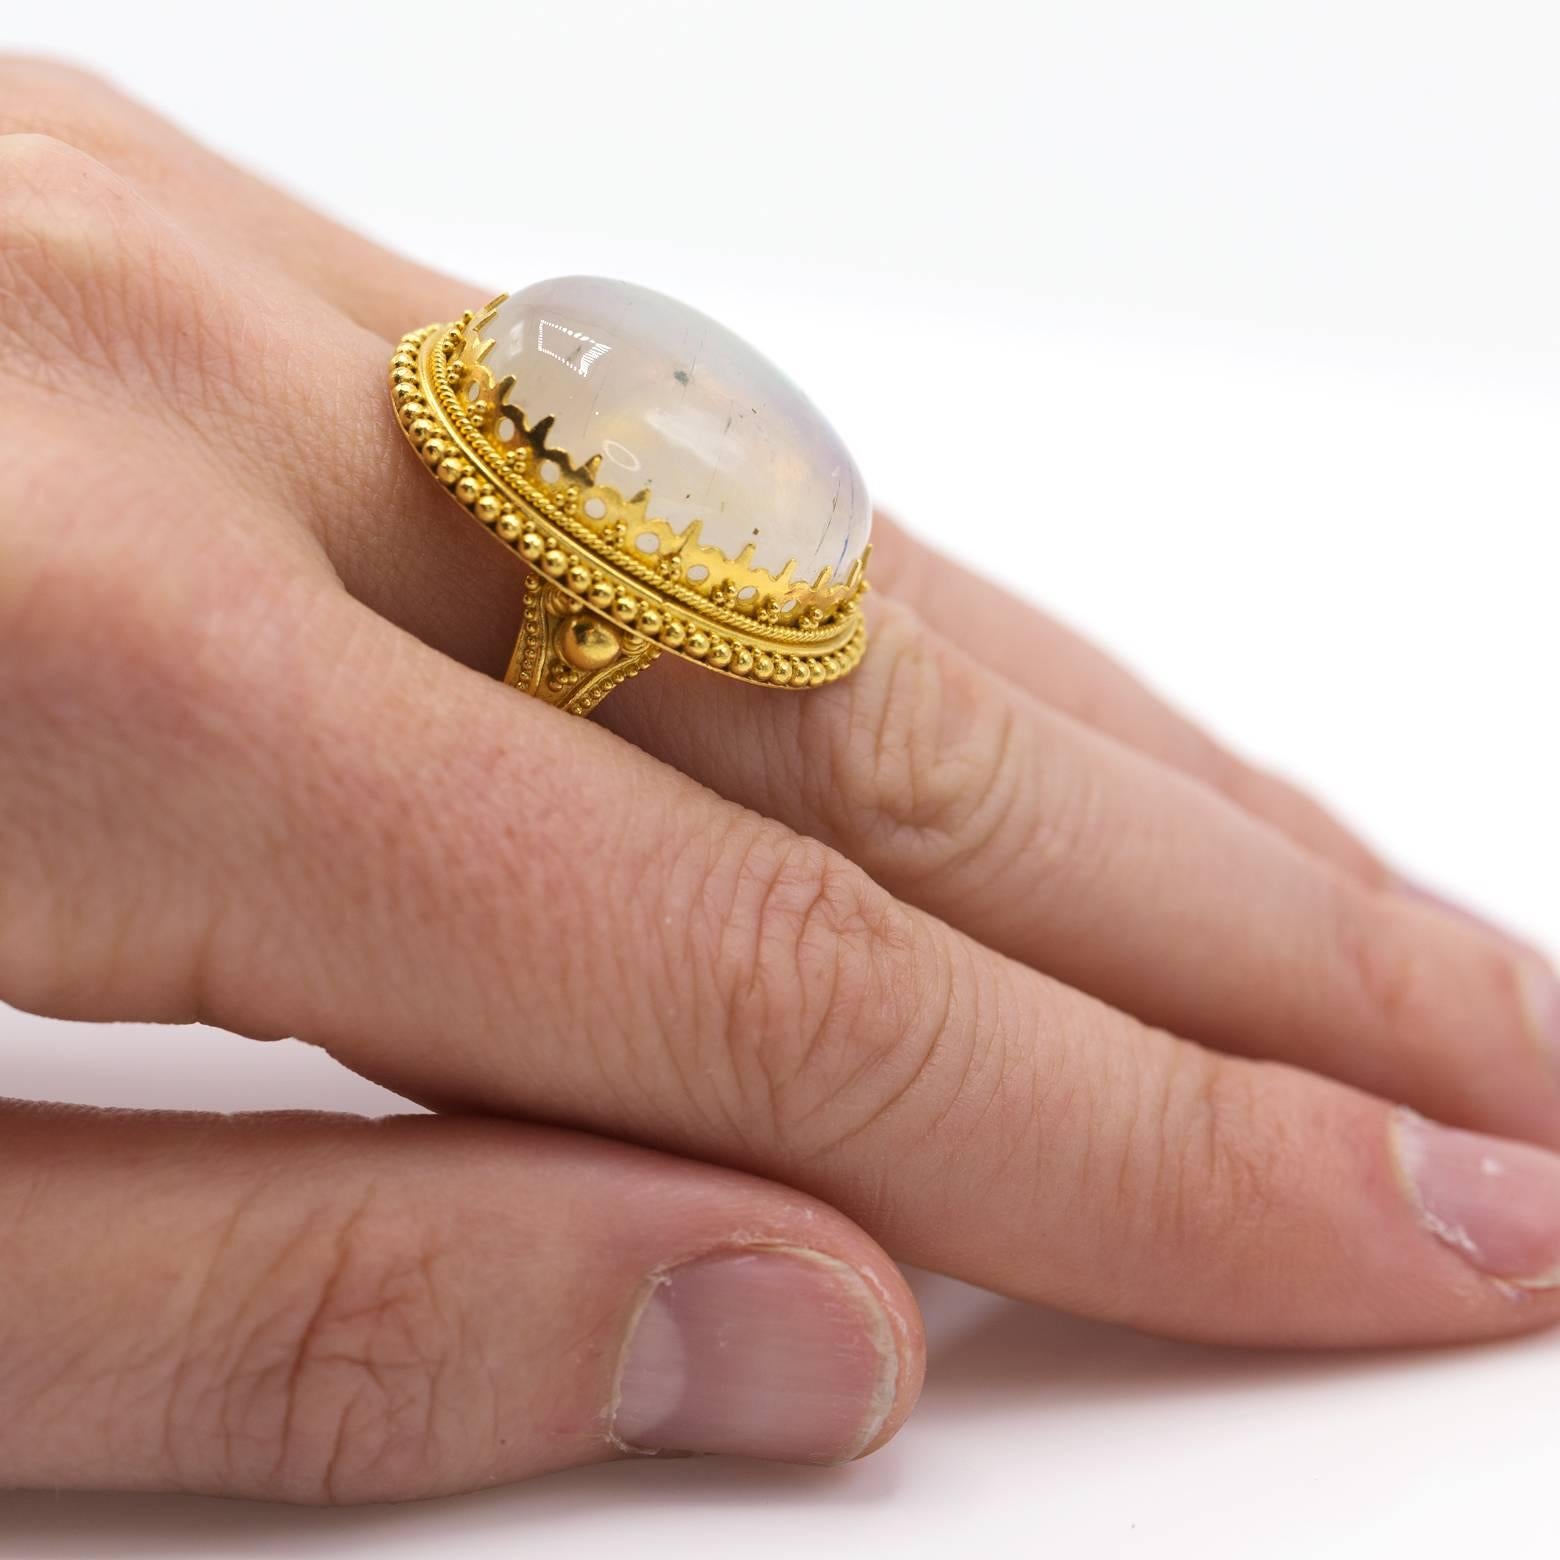 Rainbow Moonstone in a Ring 22k Yellow Gold Balinese  1